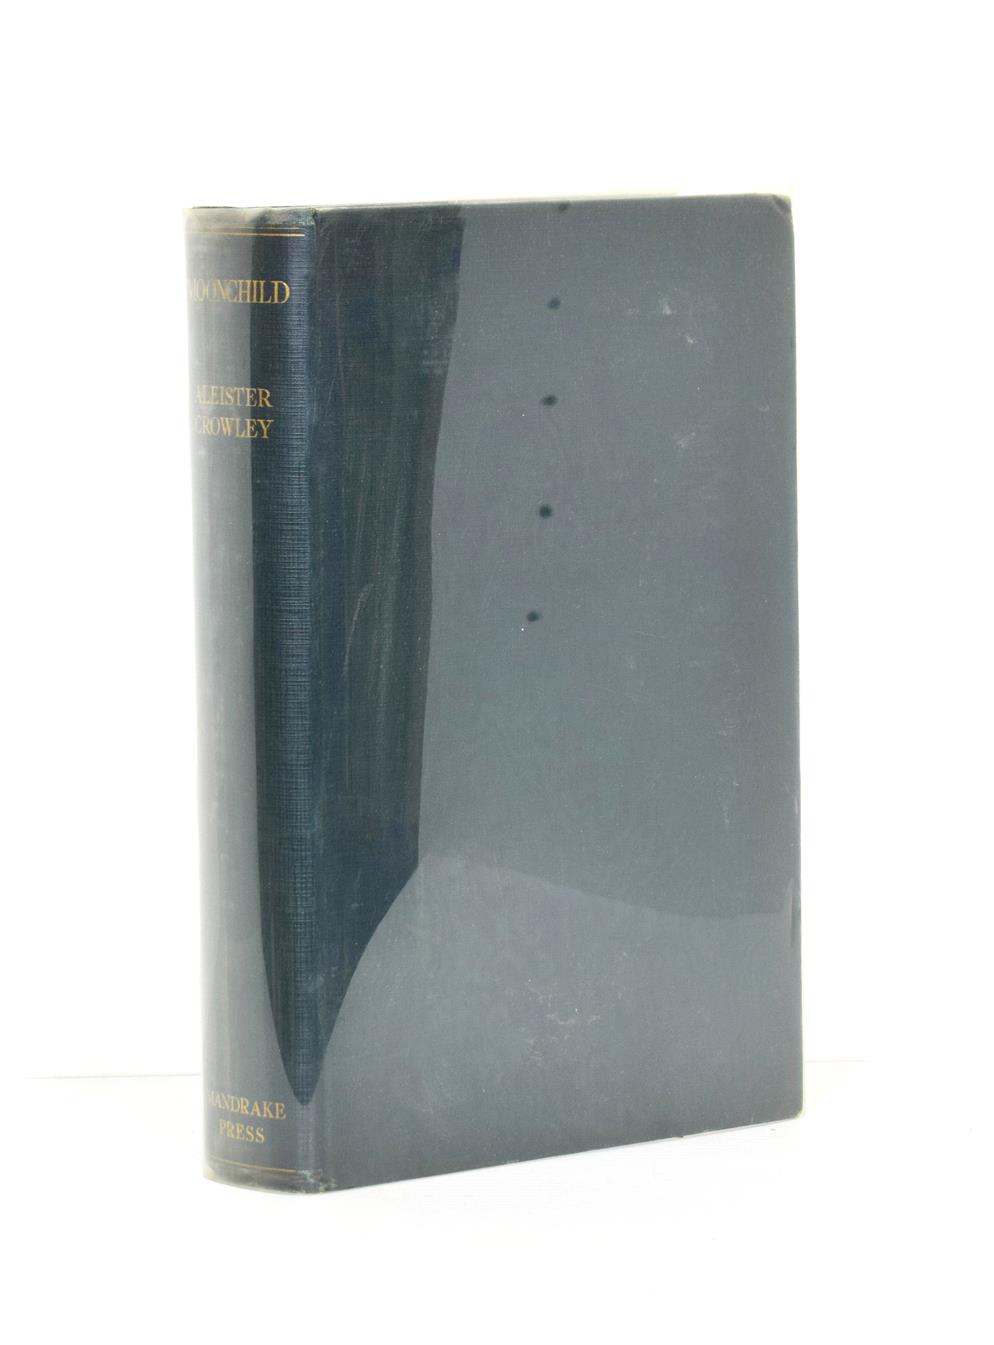 Lot 48 - Crowley (Aleister) Moonchild, A Prologue, The Mandrake Press, 1929, first edition, original cloth